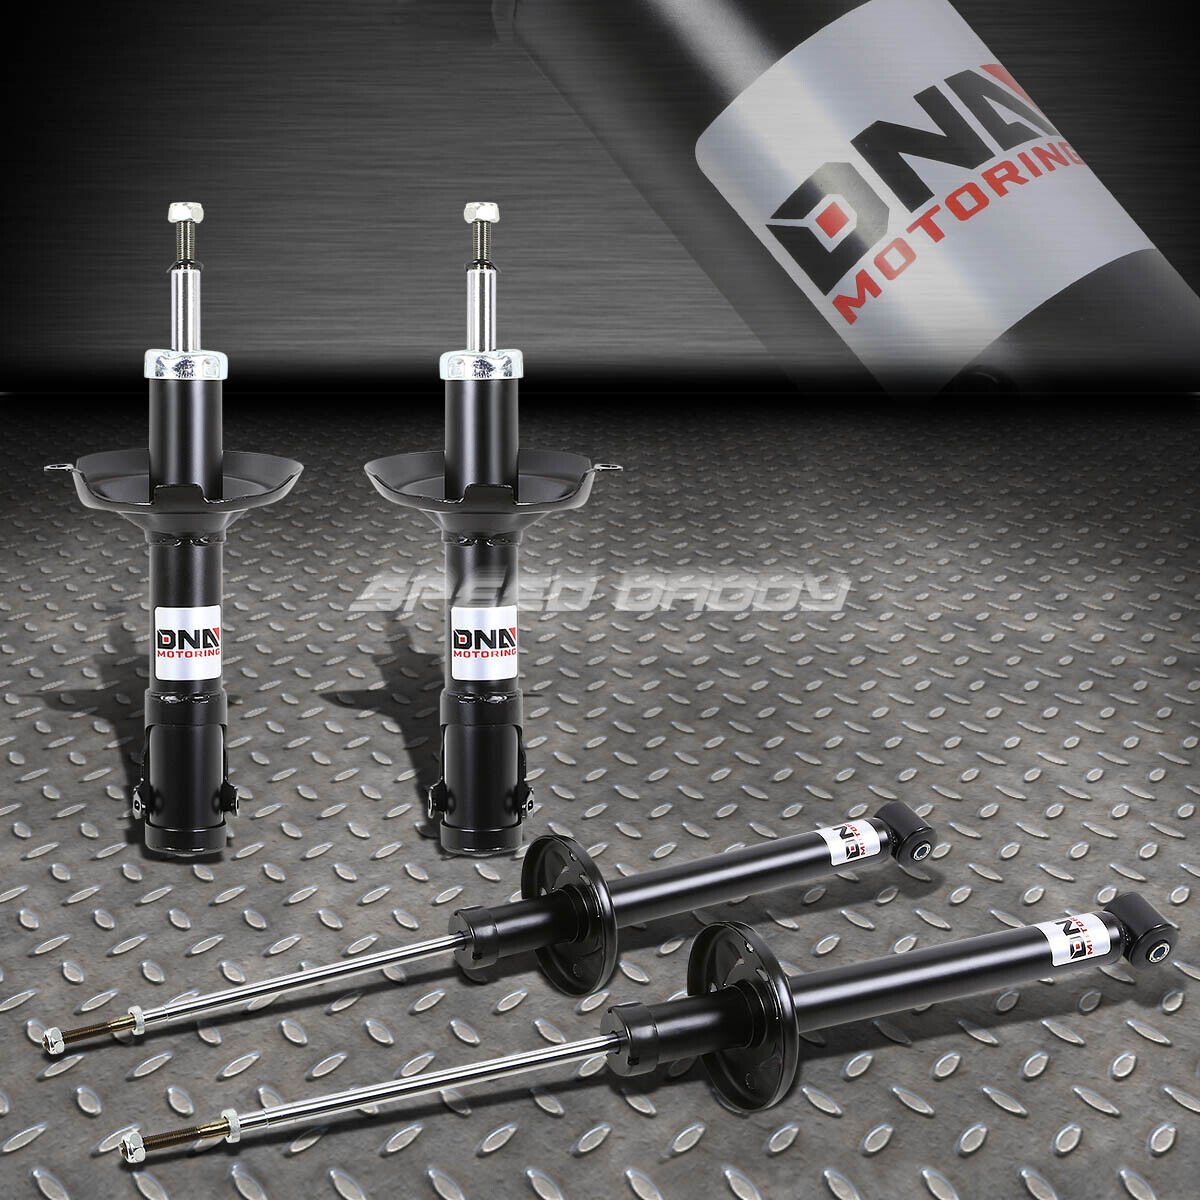 FOR 85-99 GOLF/JETTA DNA FRONT+REAR OE GAS SHOCK ABSORBER STRUTS SPRING/COILOVER